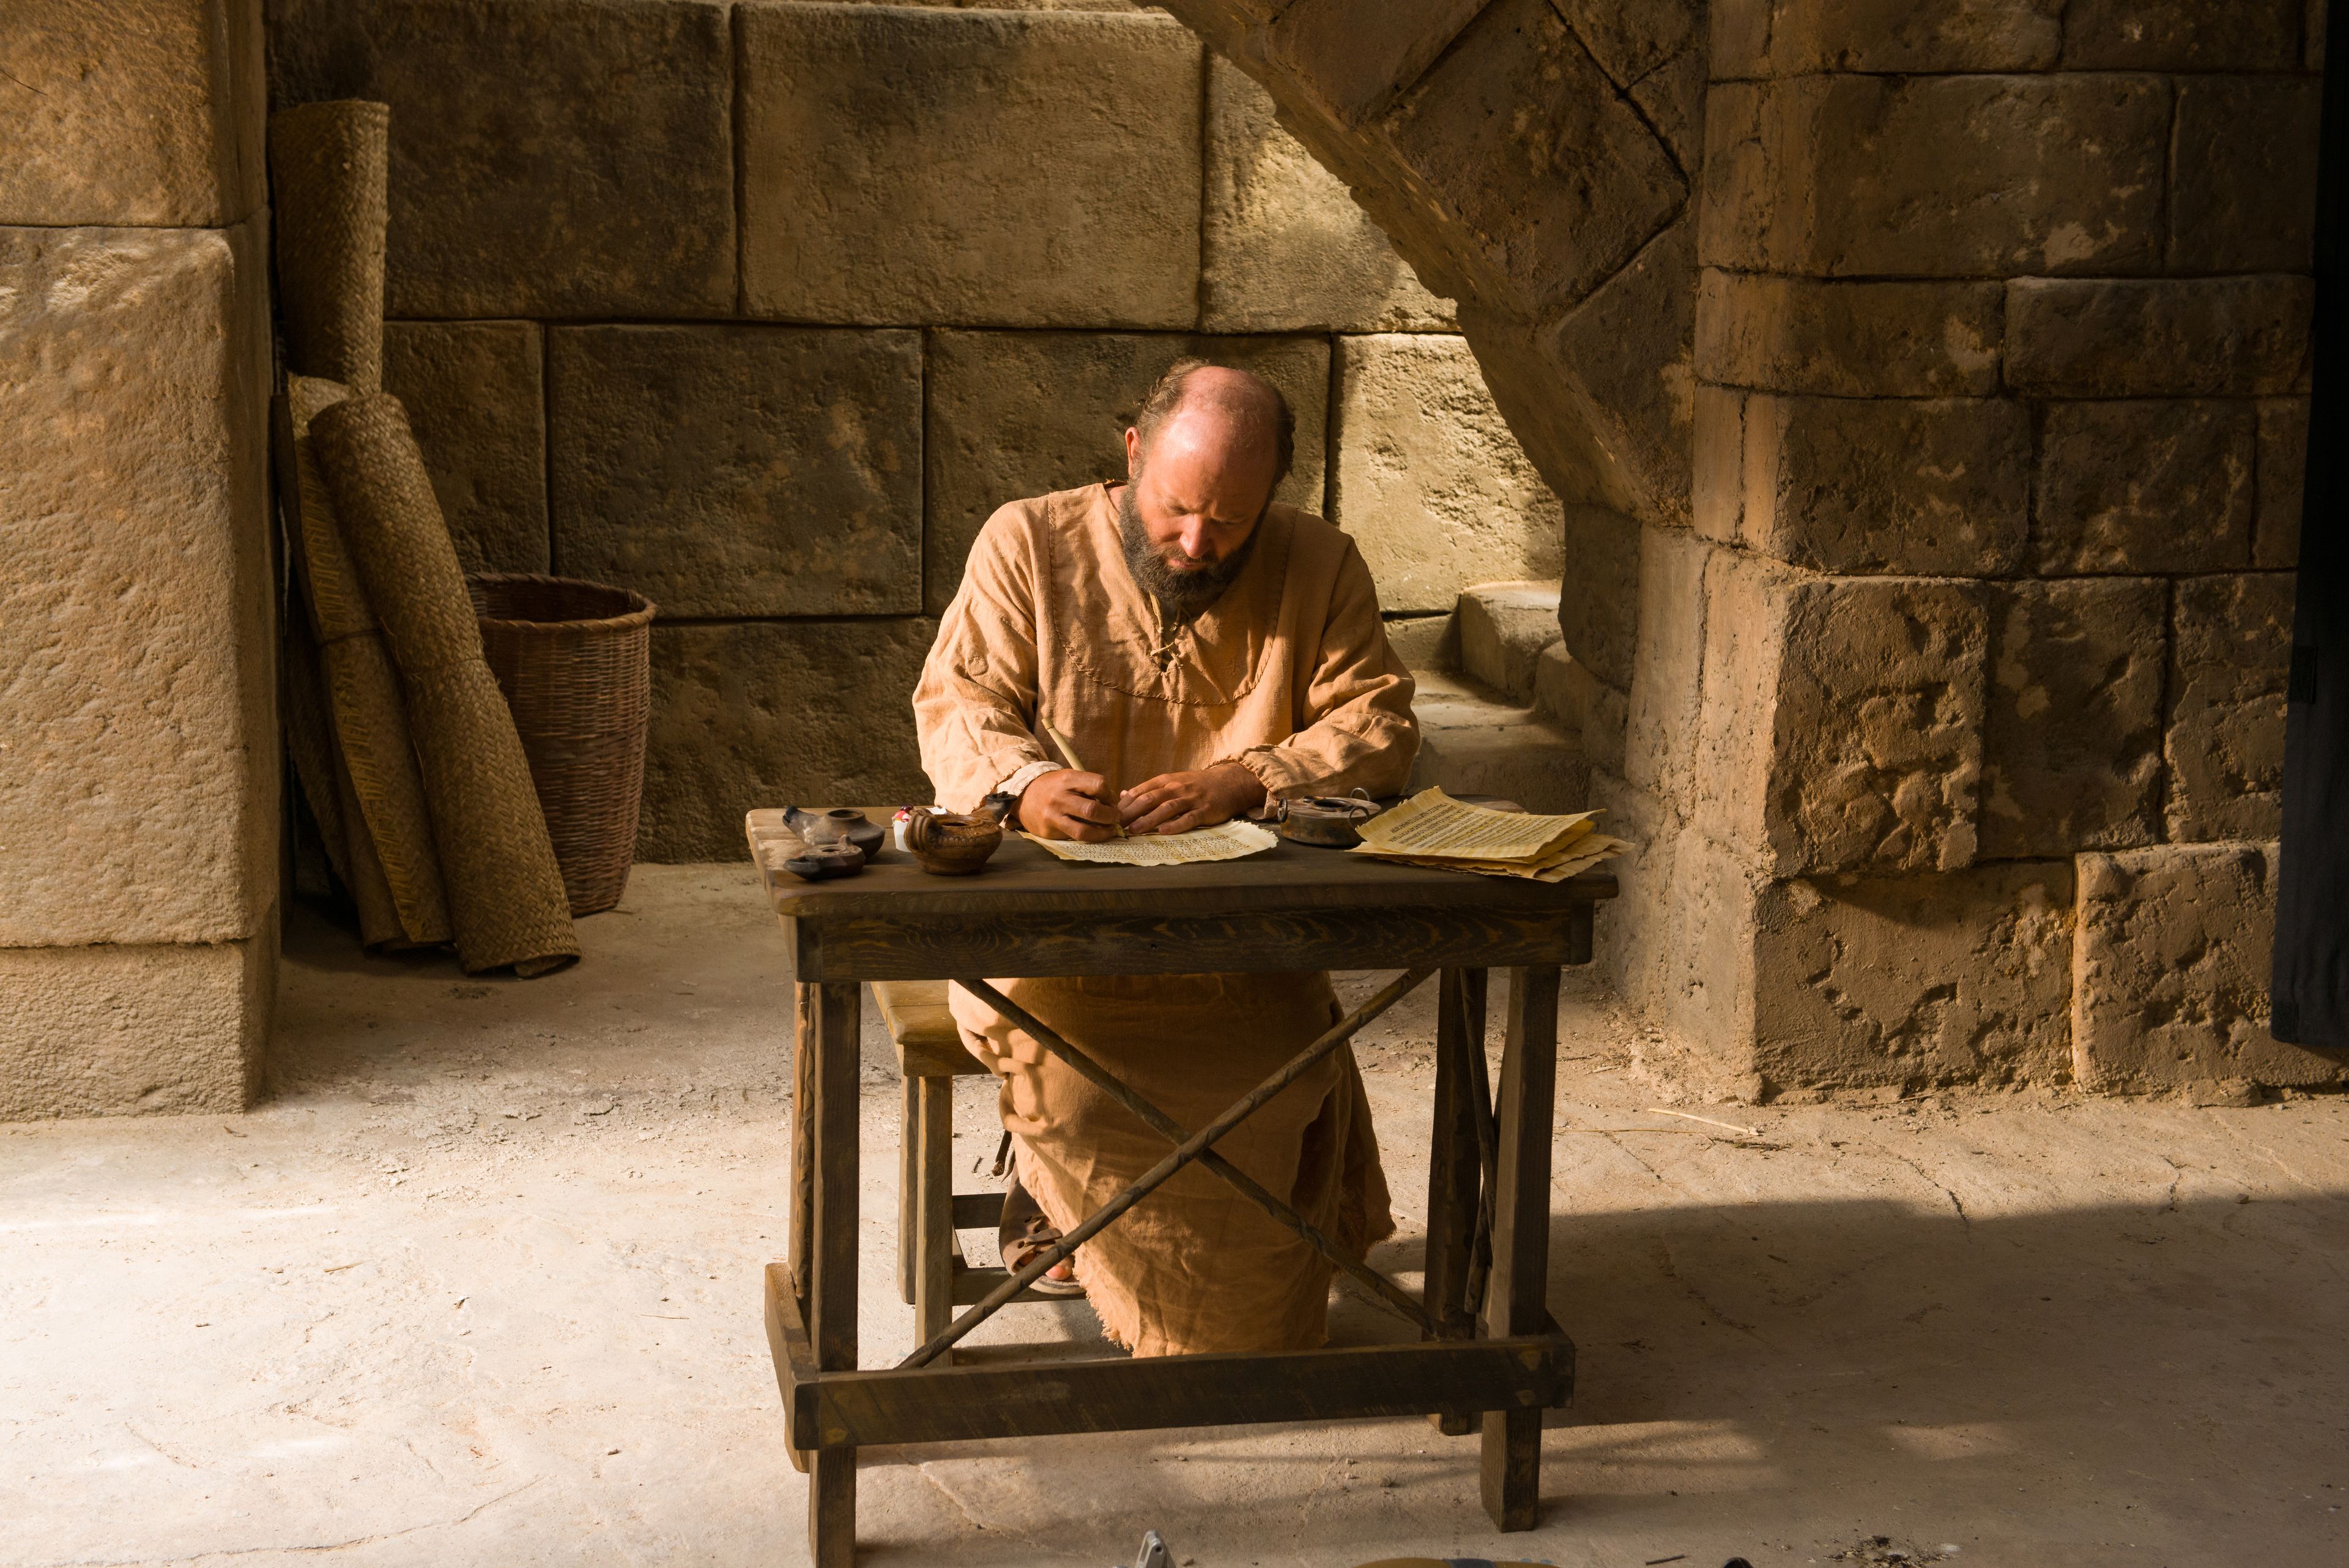 Paul sitting at a table and writing an epistle to the Corinthians.